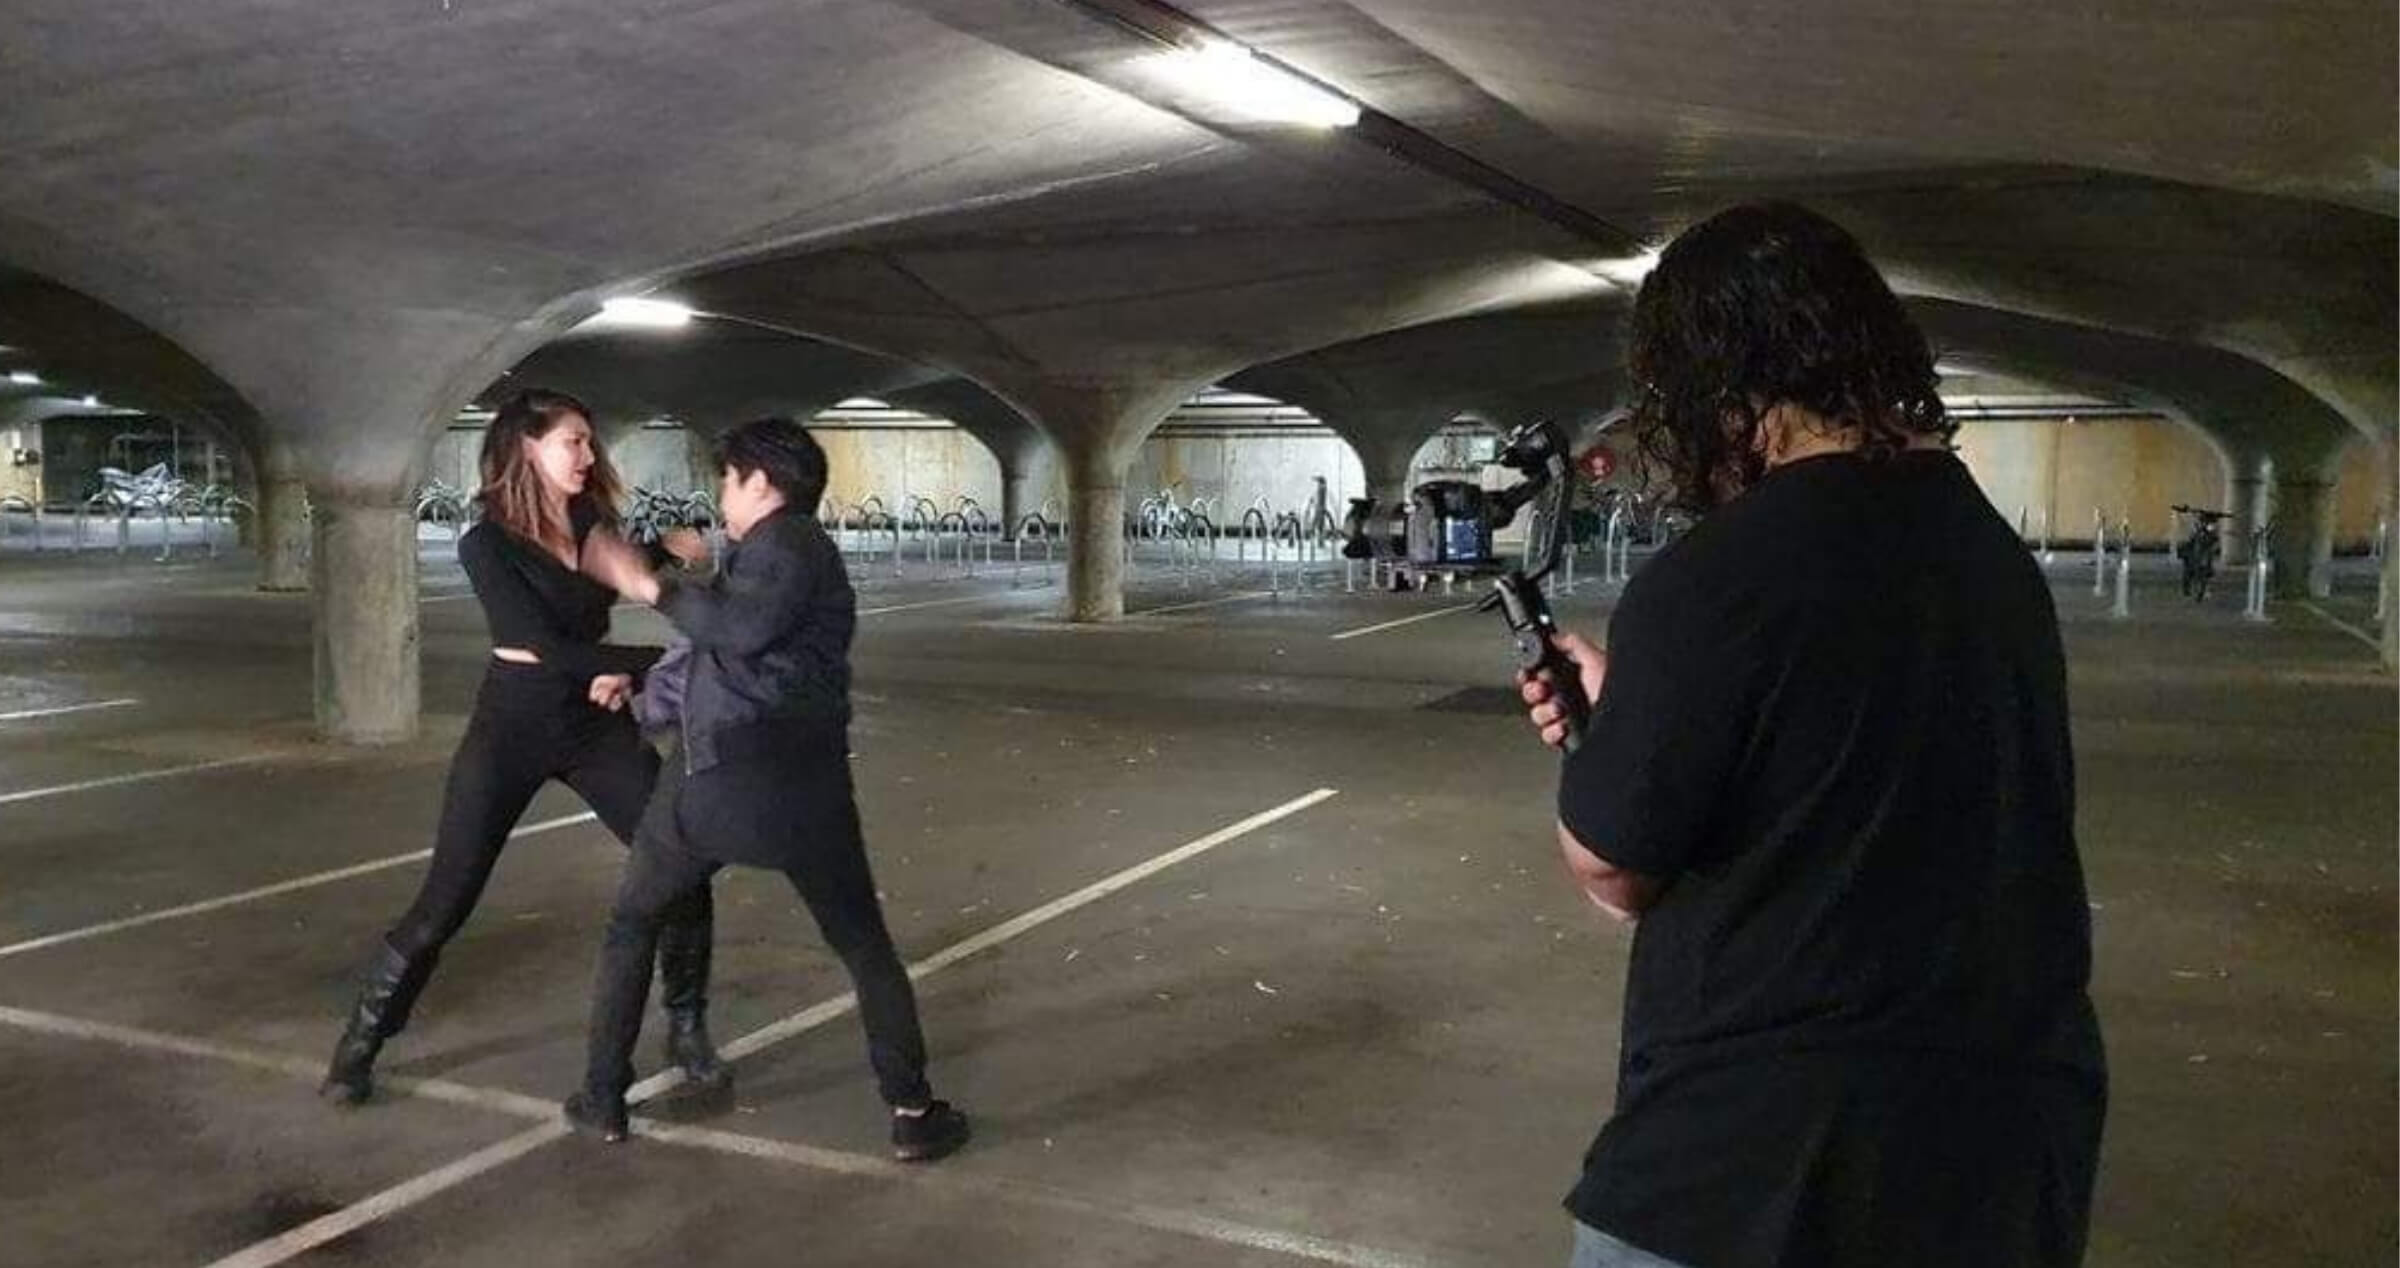 Image of young man behind camera shooting an action scene in dark underground location